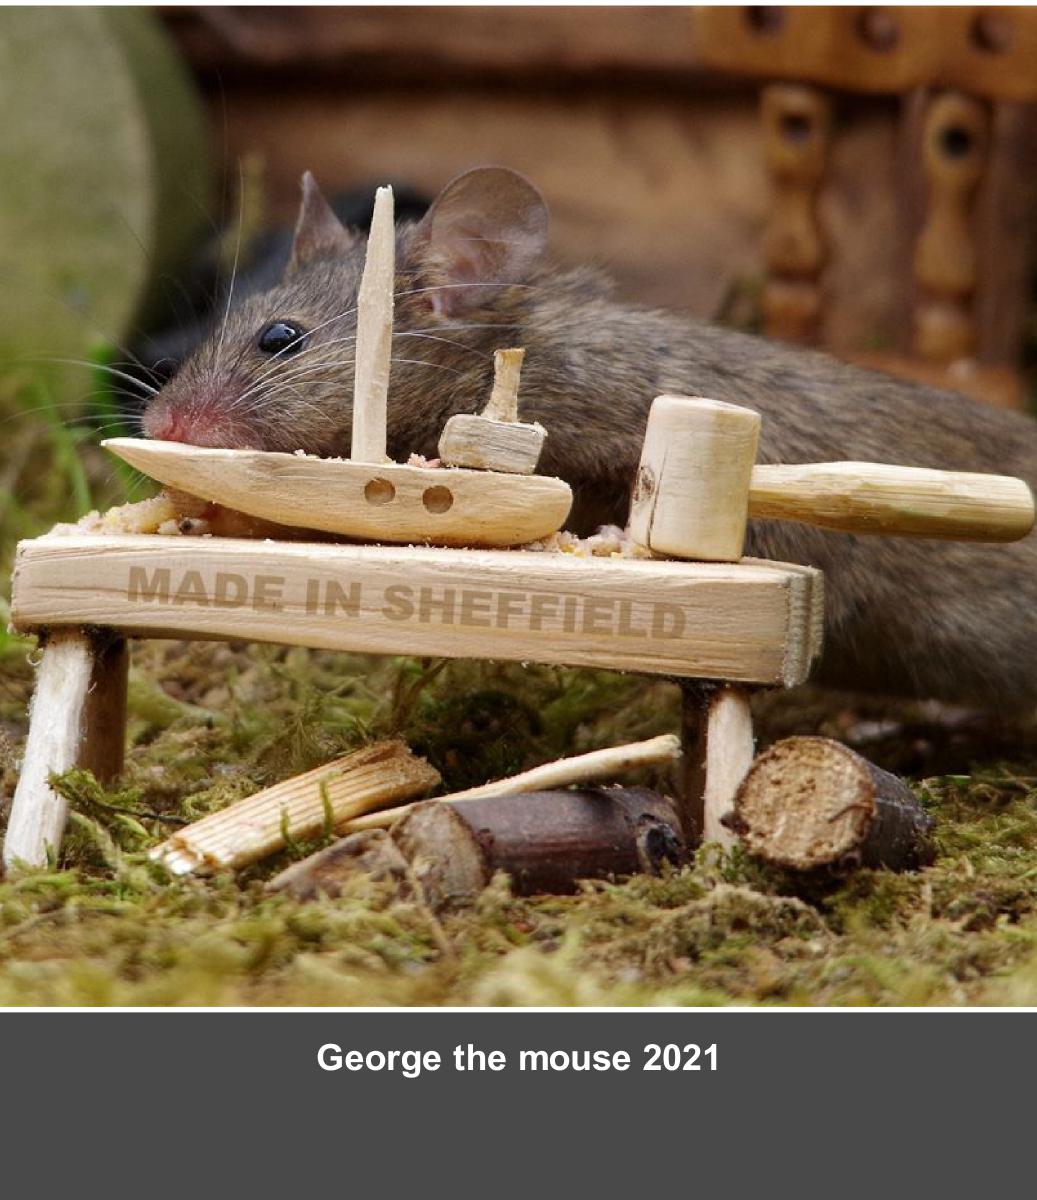 George the mouse wood work 2022 calendar